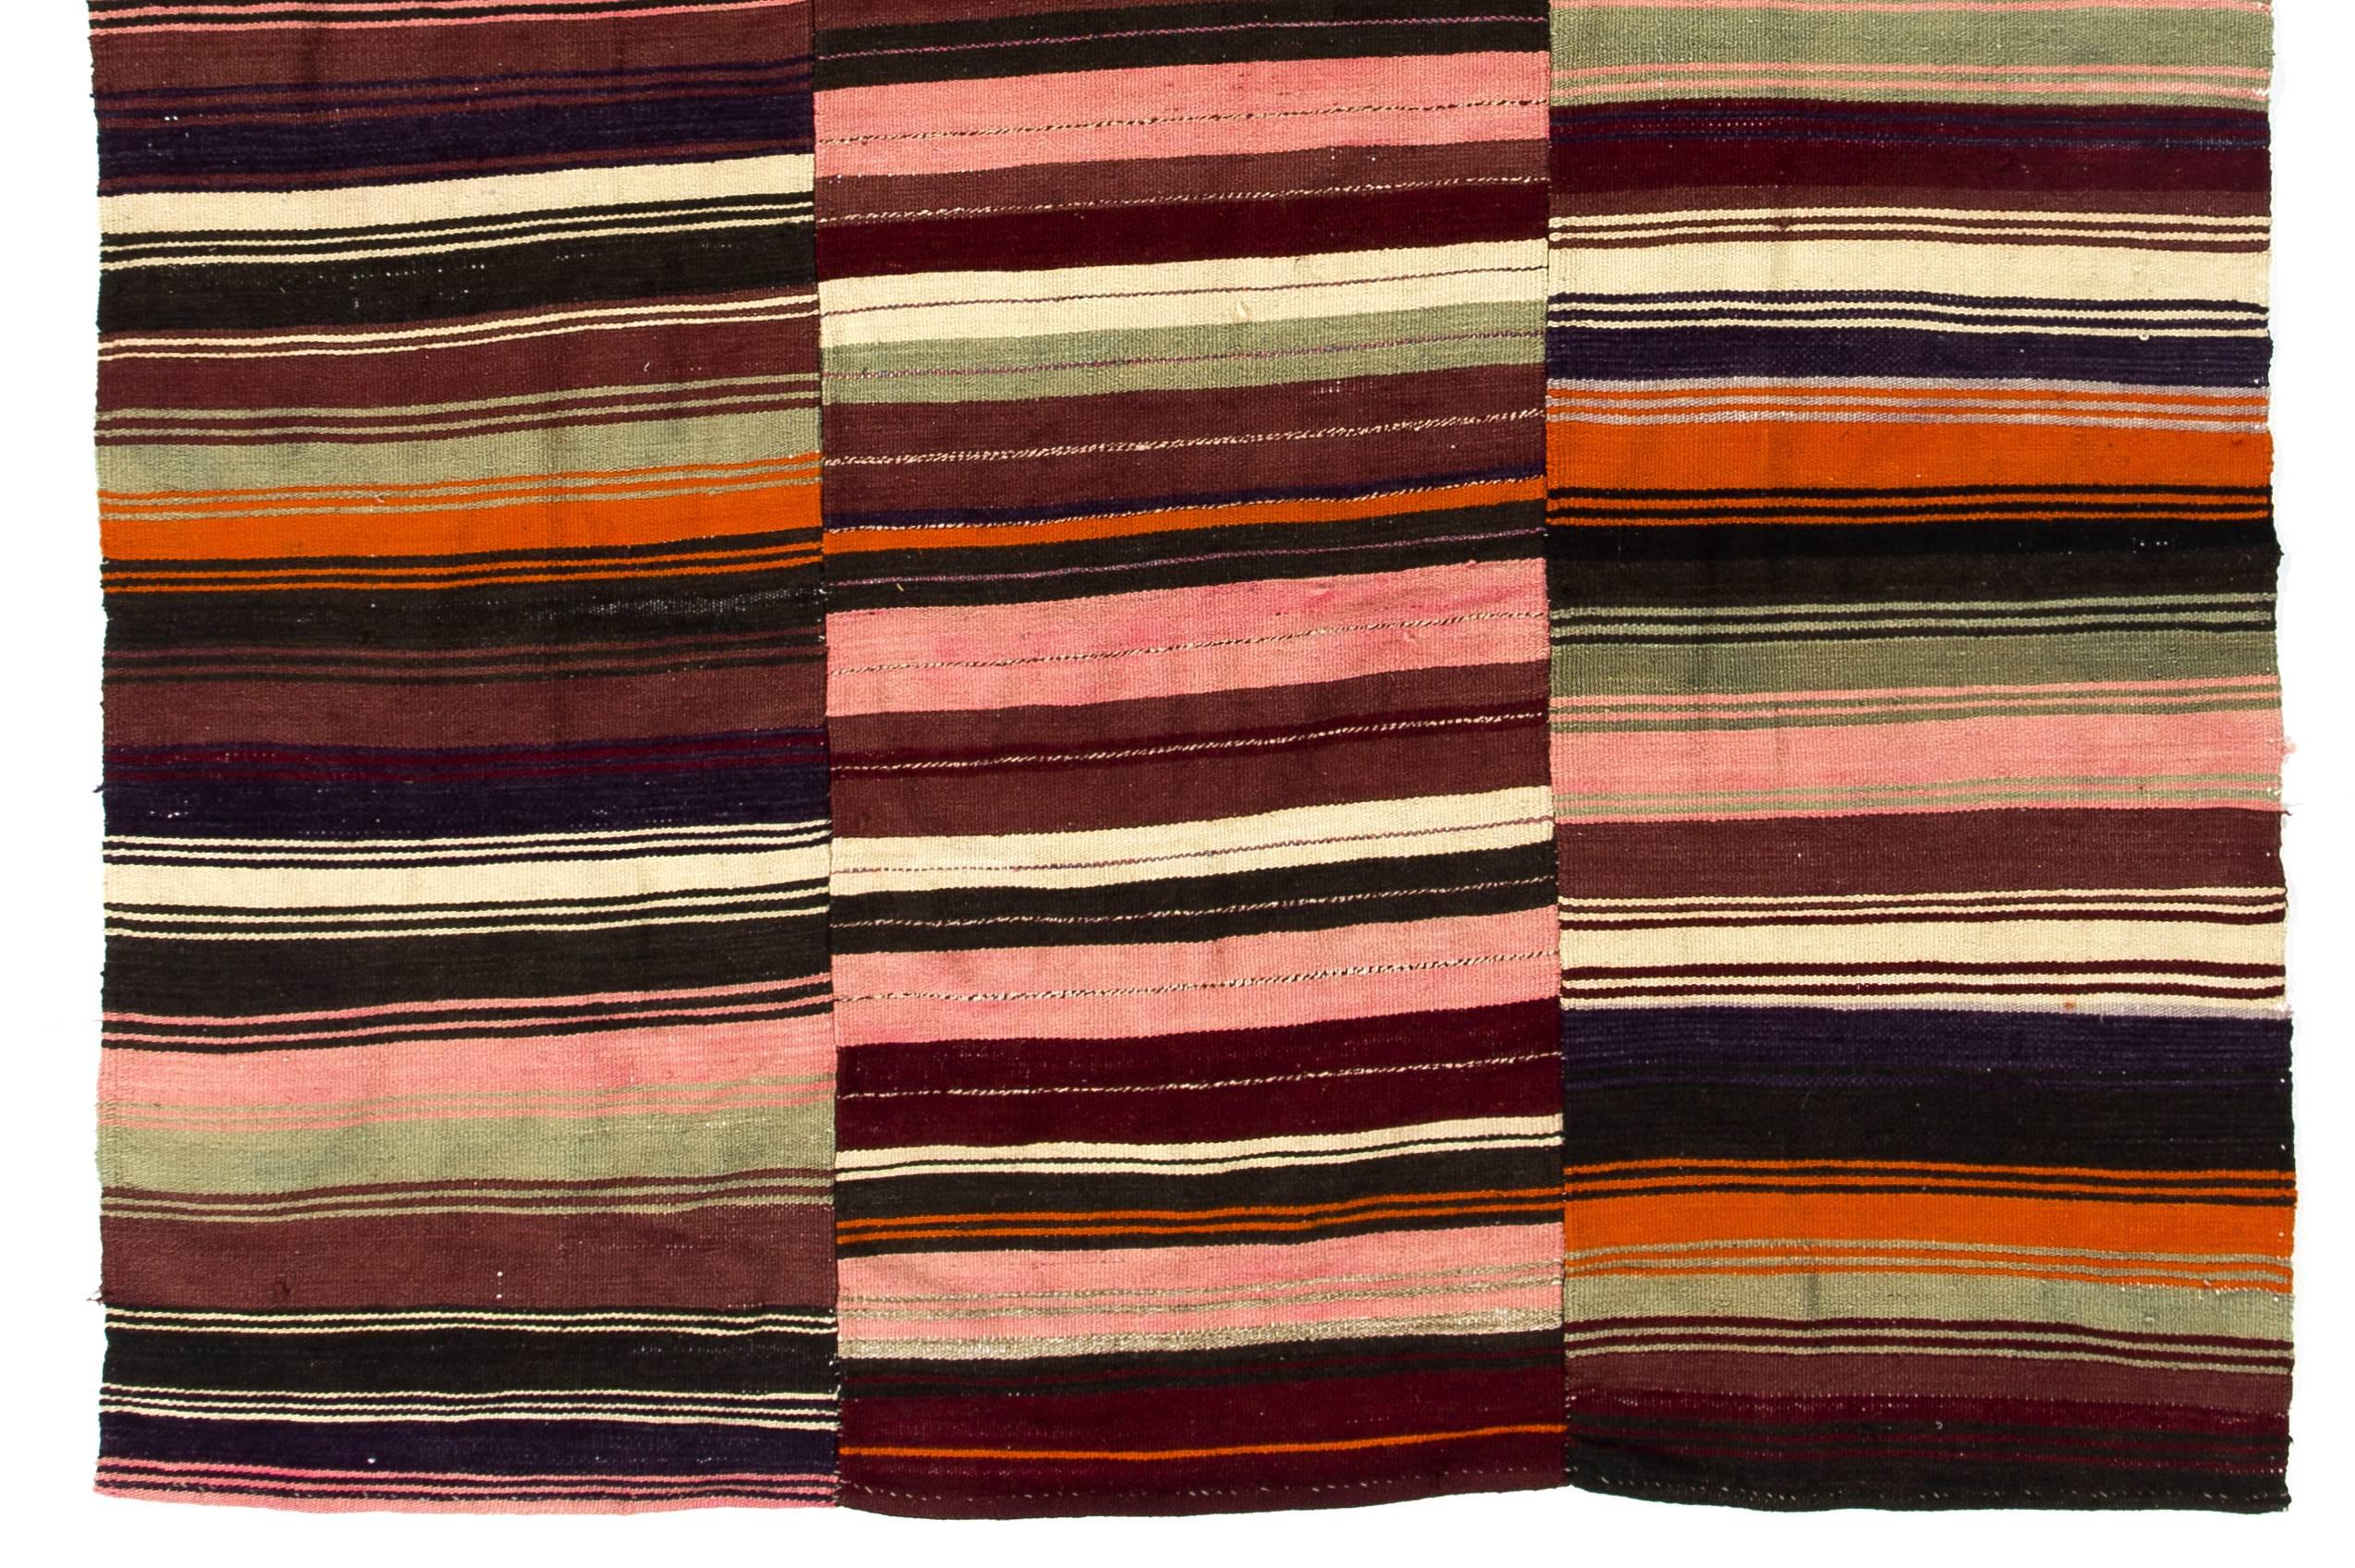 This elegant and colorful vintage kilim rug was handwoven in three panels. It is made of cotton and wool, blended nicely to create a fine sturdy floor covering. It features a simple, minimalist striped design with a gorgeous color palette of cotton